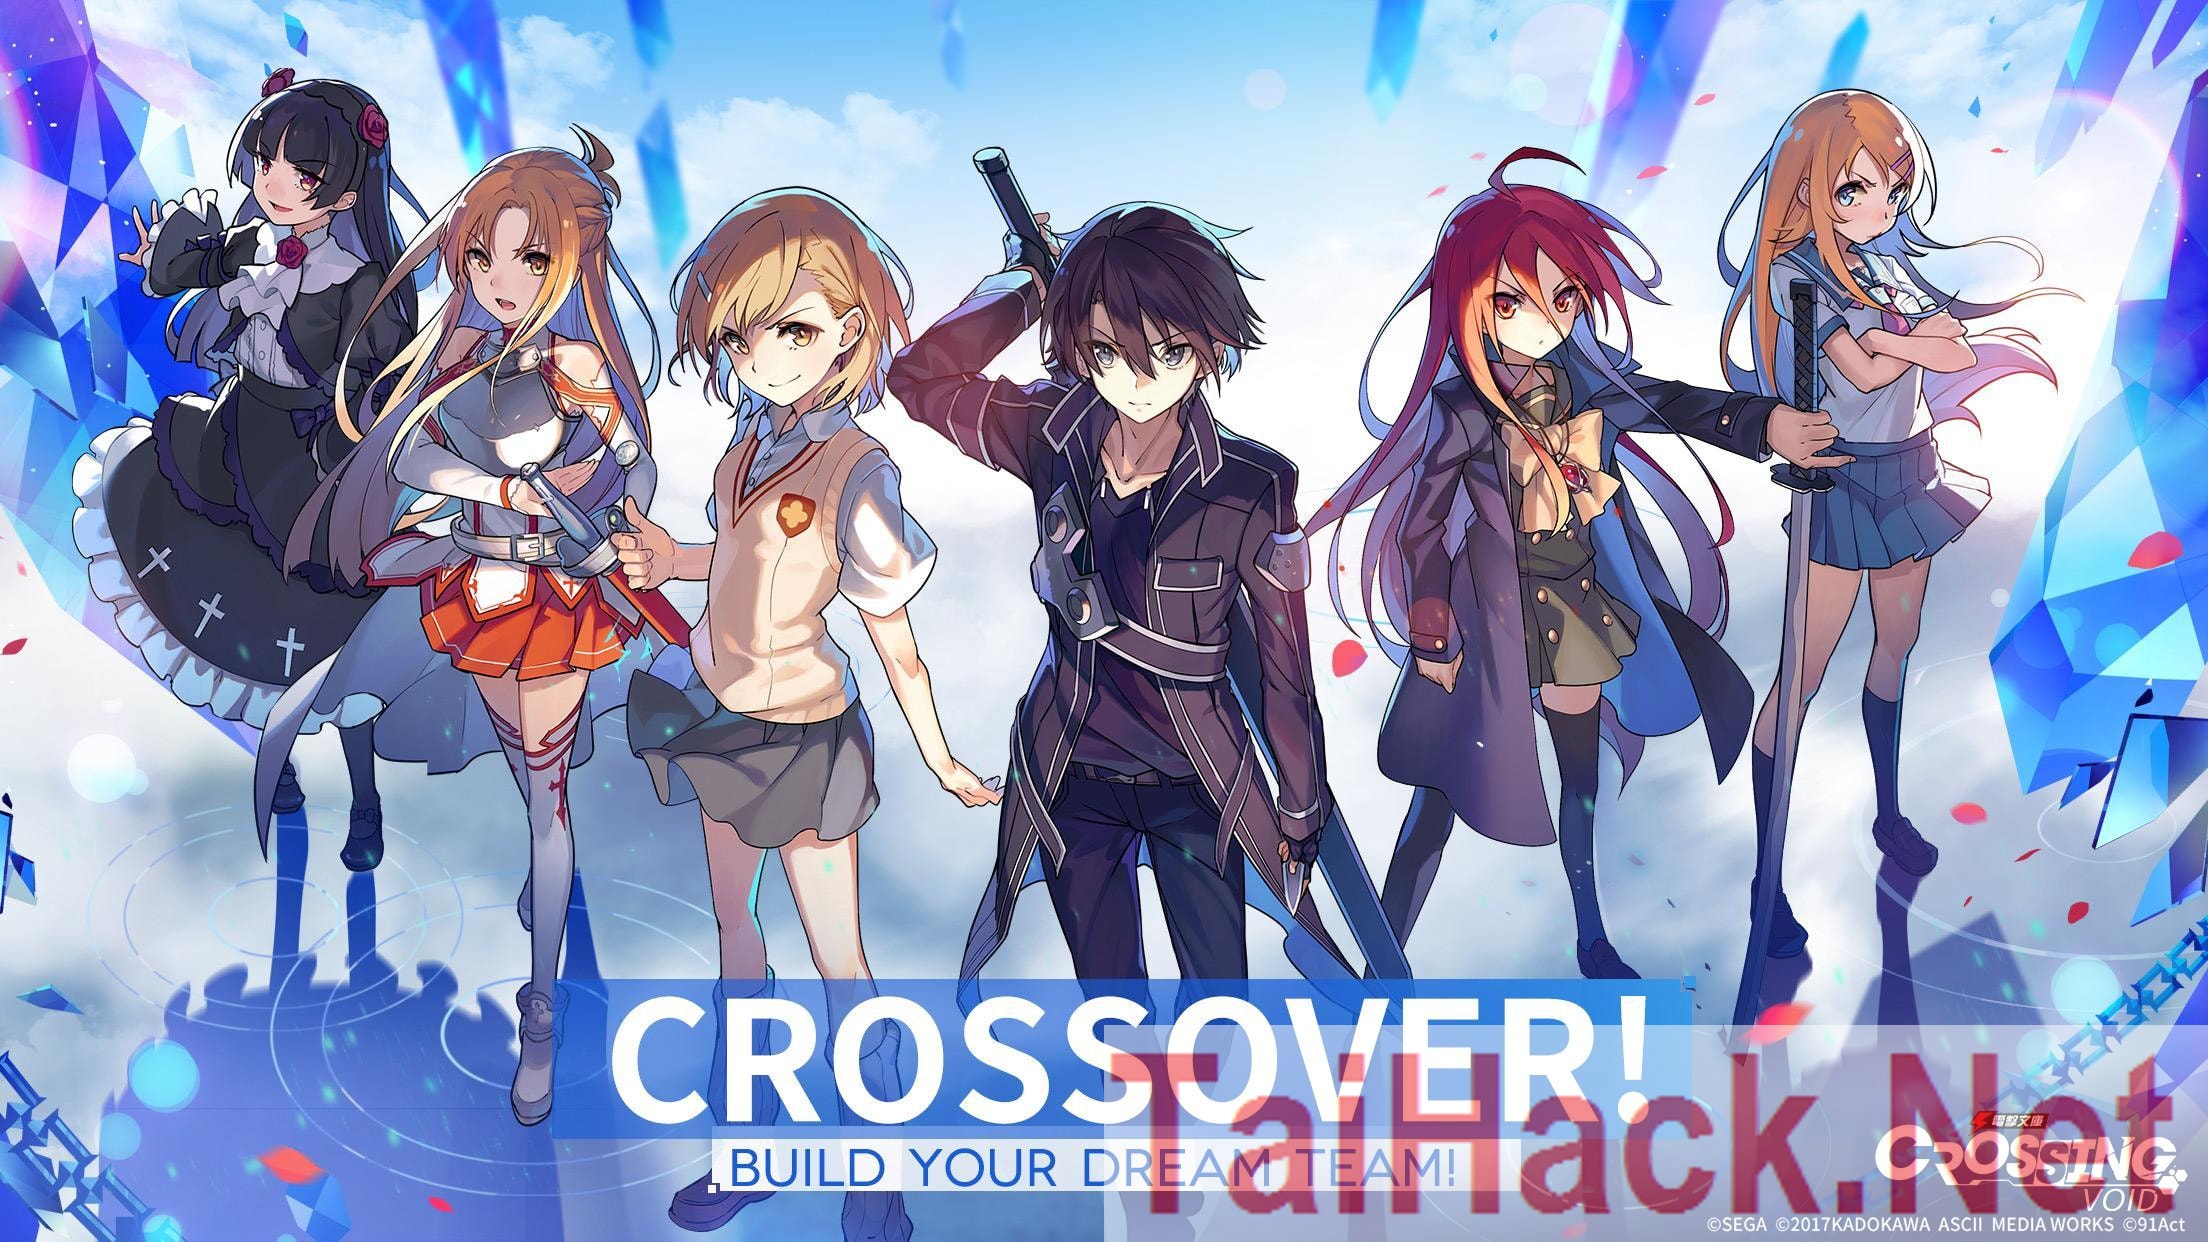 Download Hack Crossing Void - Global Hack Mod for ANDROID. Best action RPG game of all time. Anime game from Japan, With this hack you absolutely can GOD MODE and many other functions are waiting for you ahead. Update all the latest hack game versions for free daily at TaiHack.Net